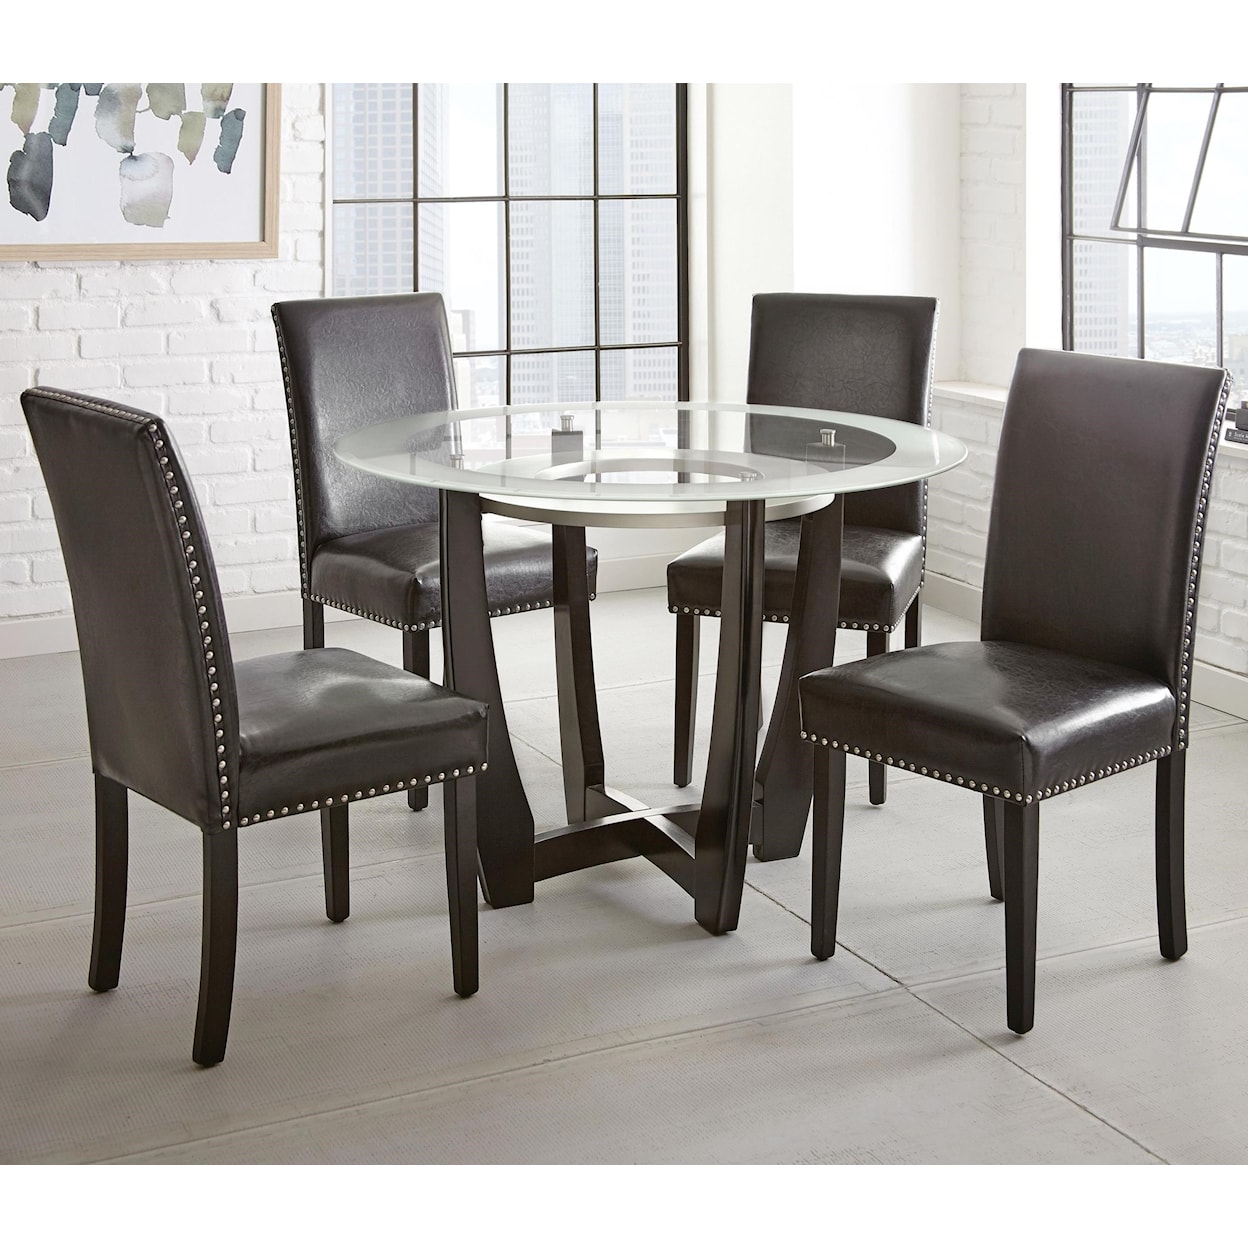 Steve Silver Verano 5pc 45" Round Glass Top Dining Table Set